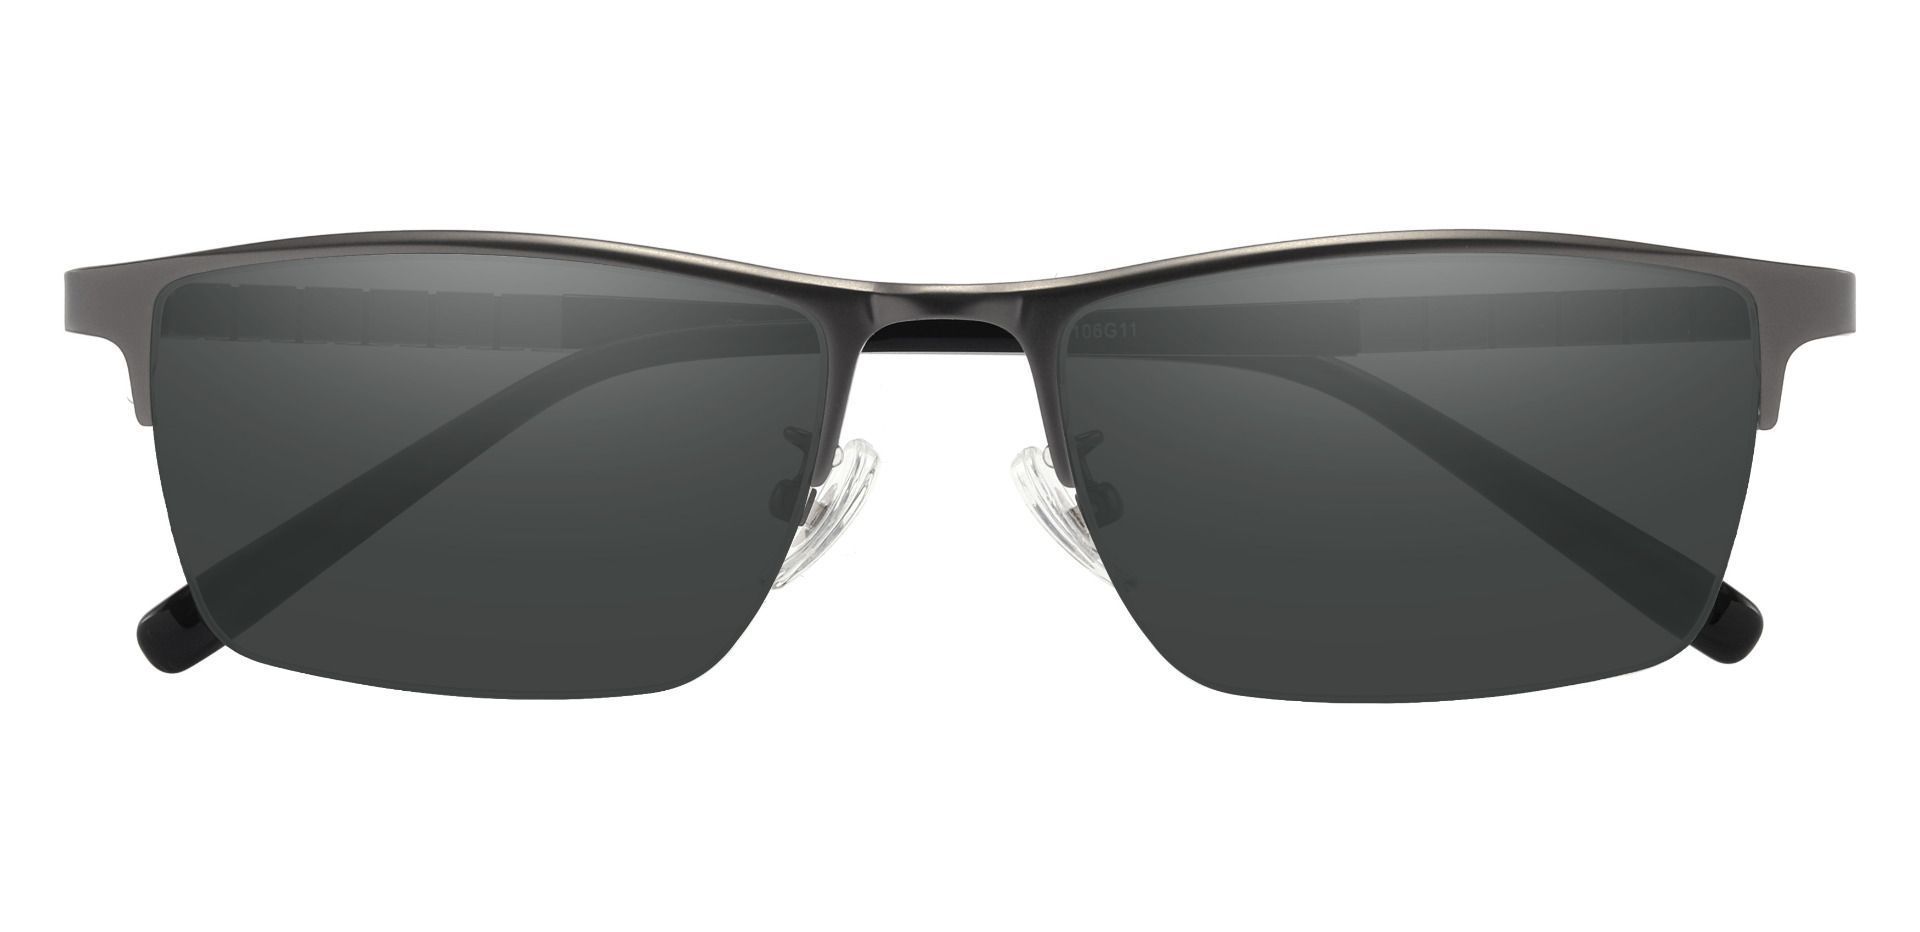 Maine Rectangle Non-Rx Sunglasses - Gray Frame With Gray Lenses